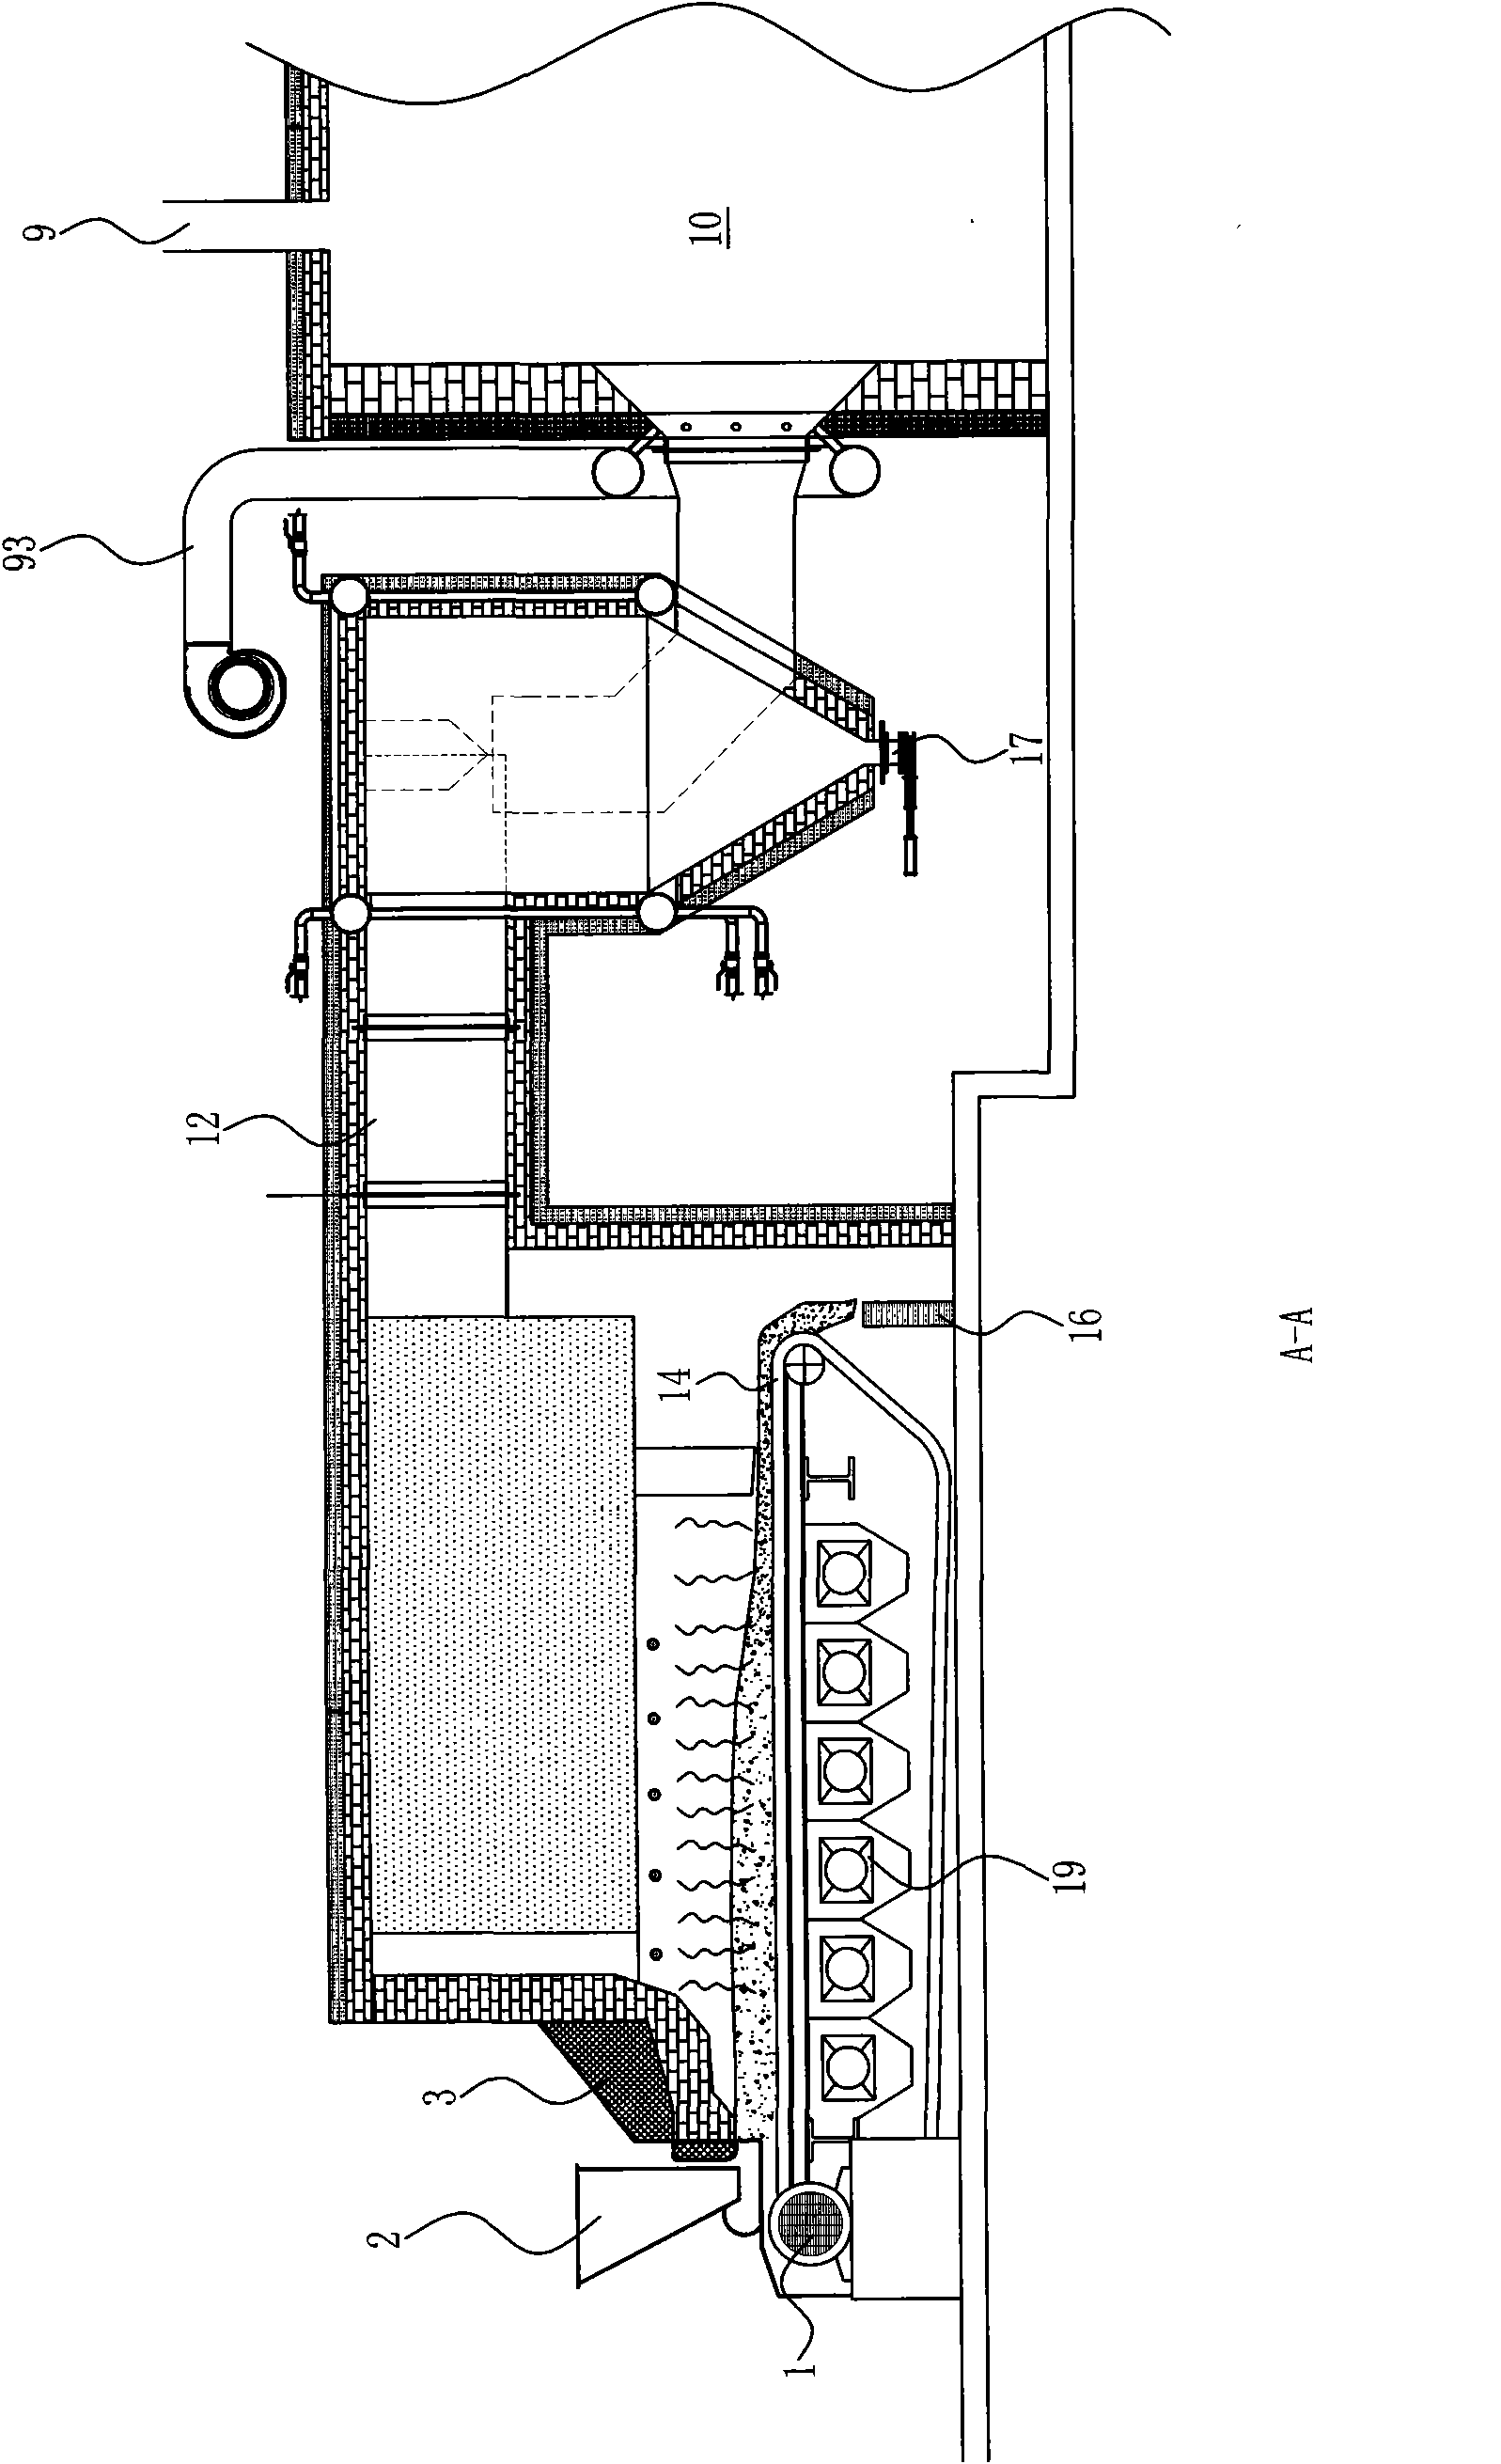 Horizontal mobile grate gasifier